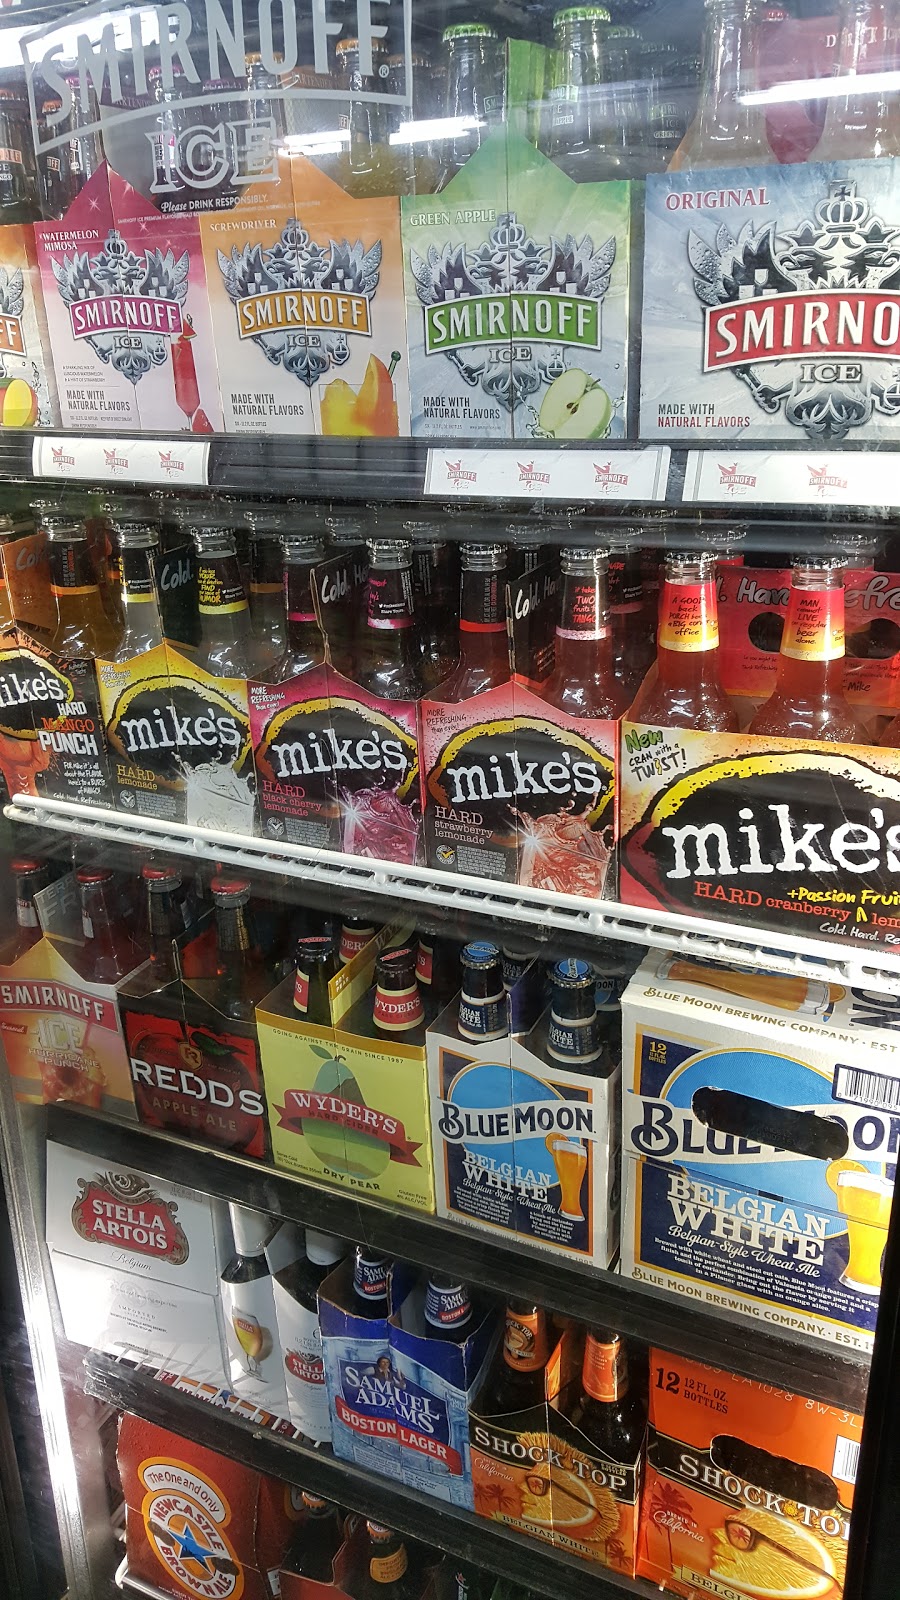 Mikes Market and Liquor | 1996 W Highland Ave, Muscoy, CA 92407 | Phone: (909) 473-3204